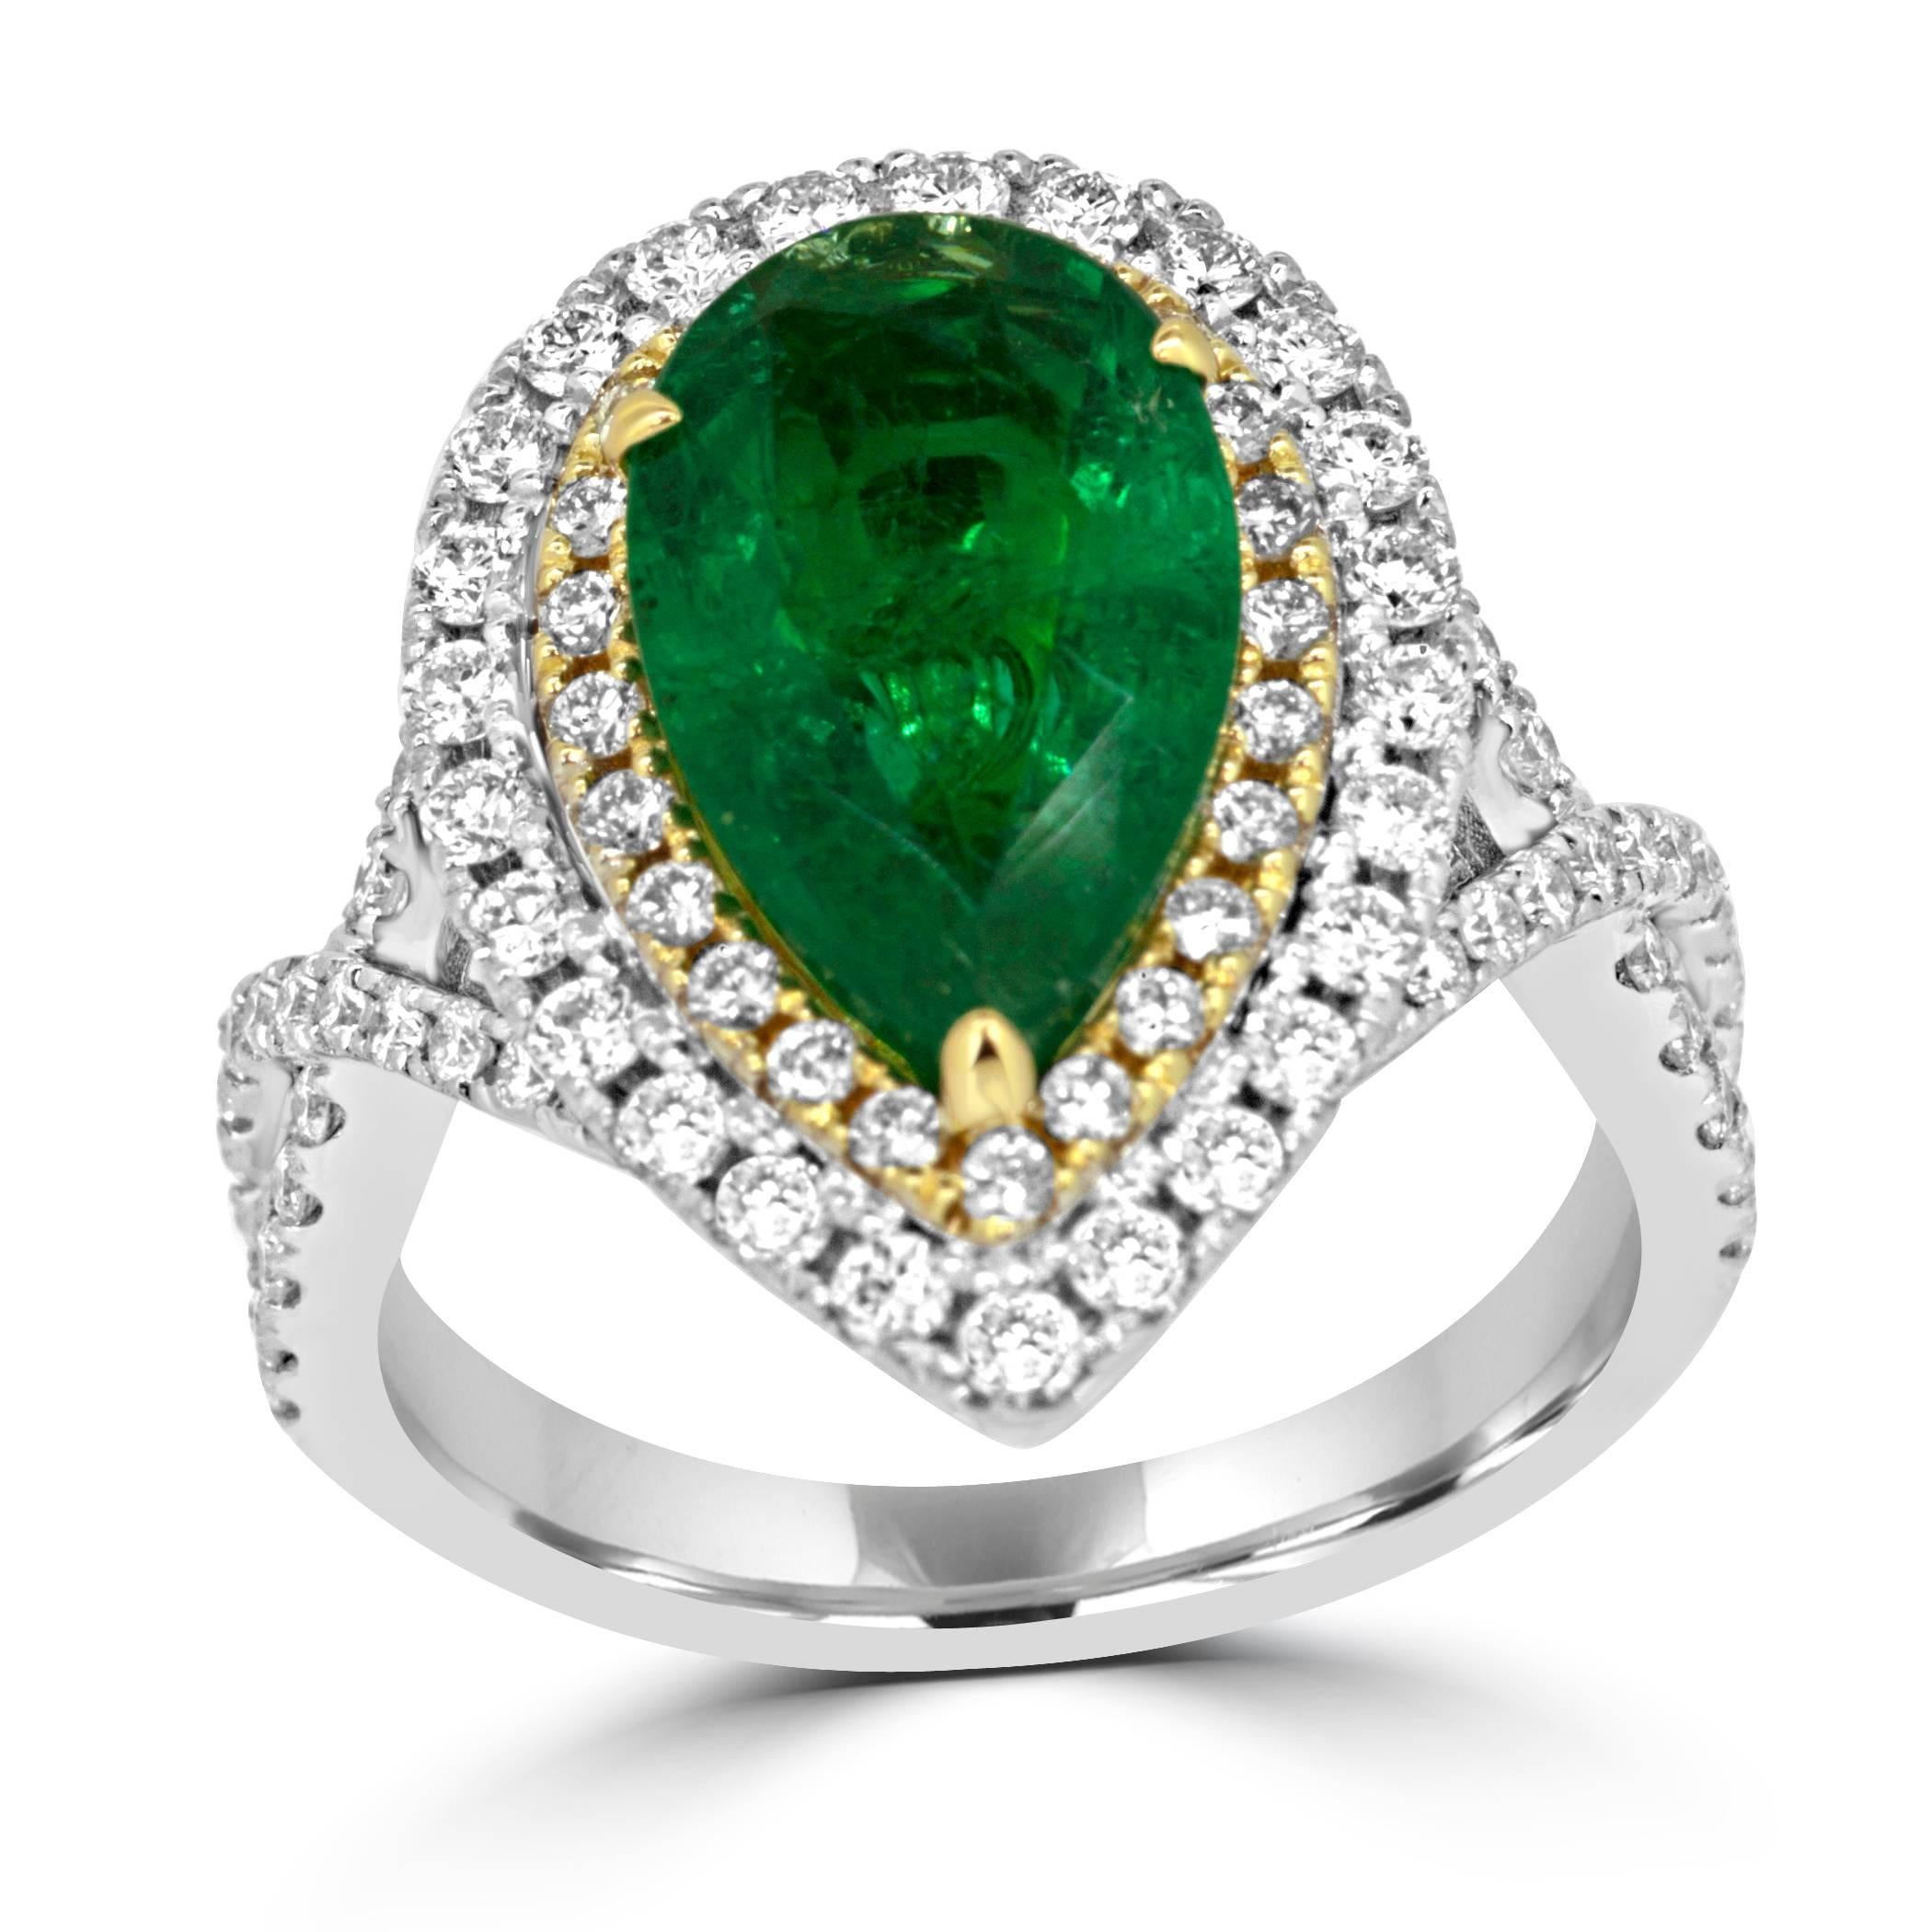 Emerald Pear Shape 2.79 Carat encircled in White Diamond Rounds 0.90 Carat in 14K White and Yellow Gold Twist Split shank Ring.

Total Stone Weight 3.69 Carat